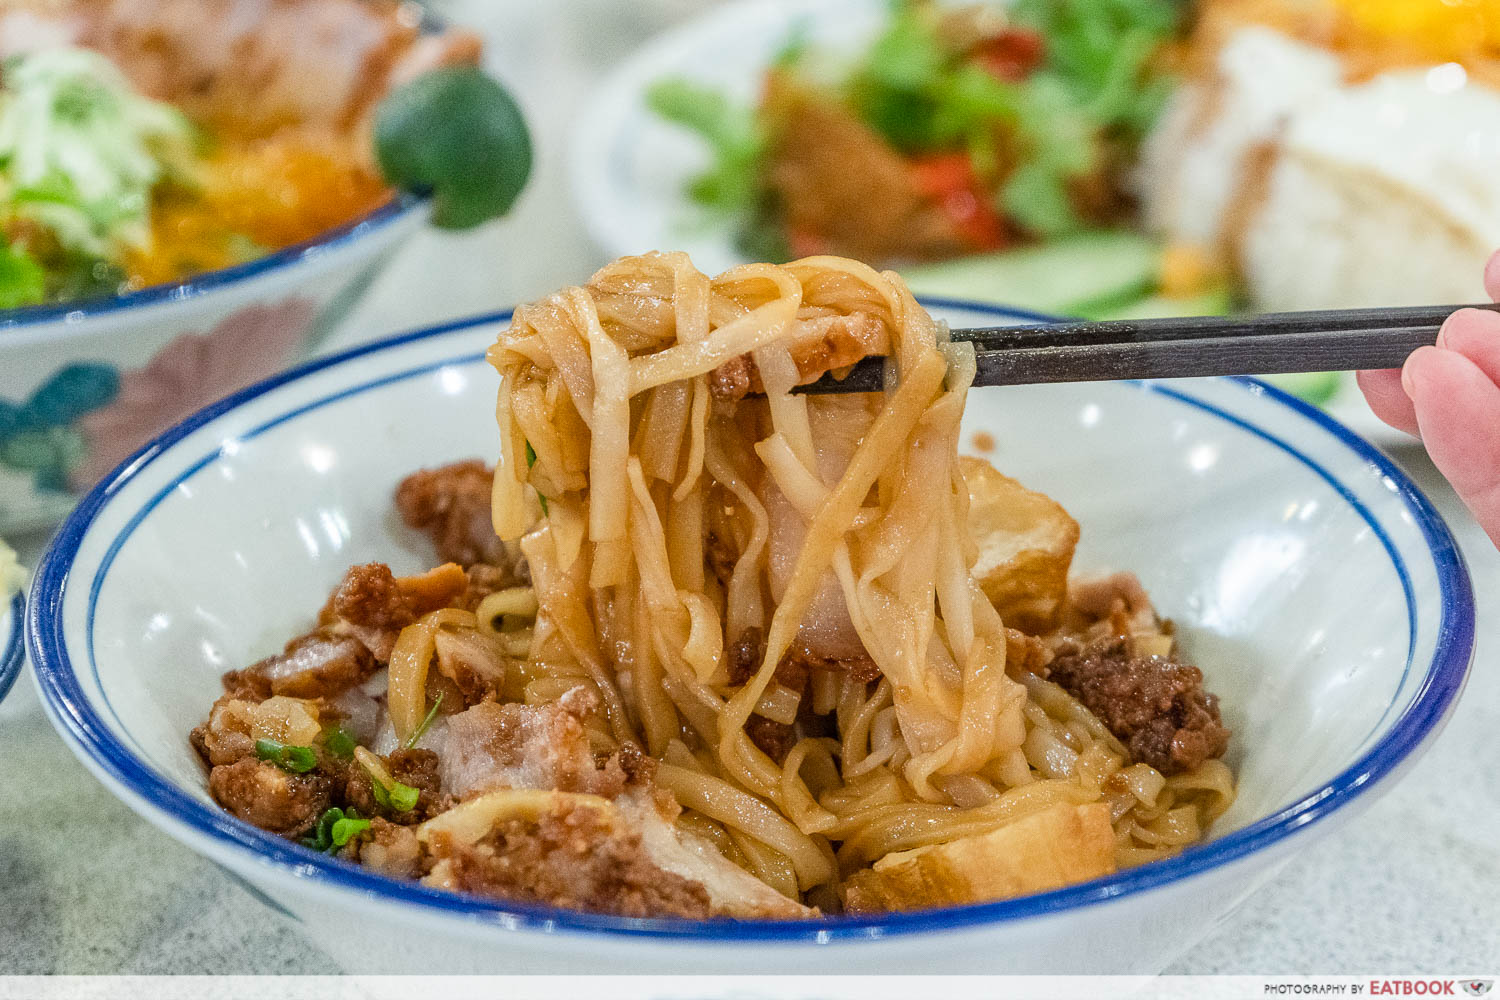 Ah Yen Traditional Fried Pork - kway teow